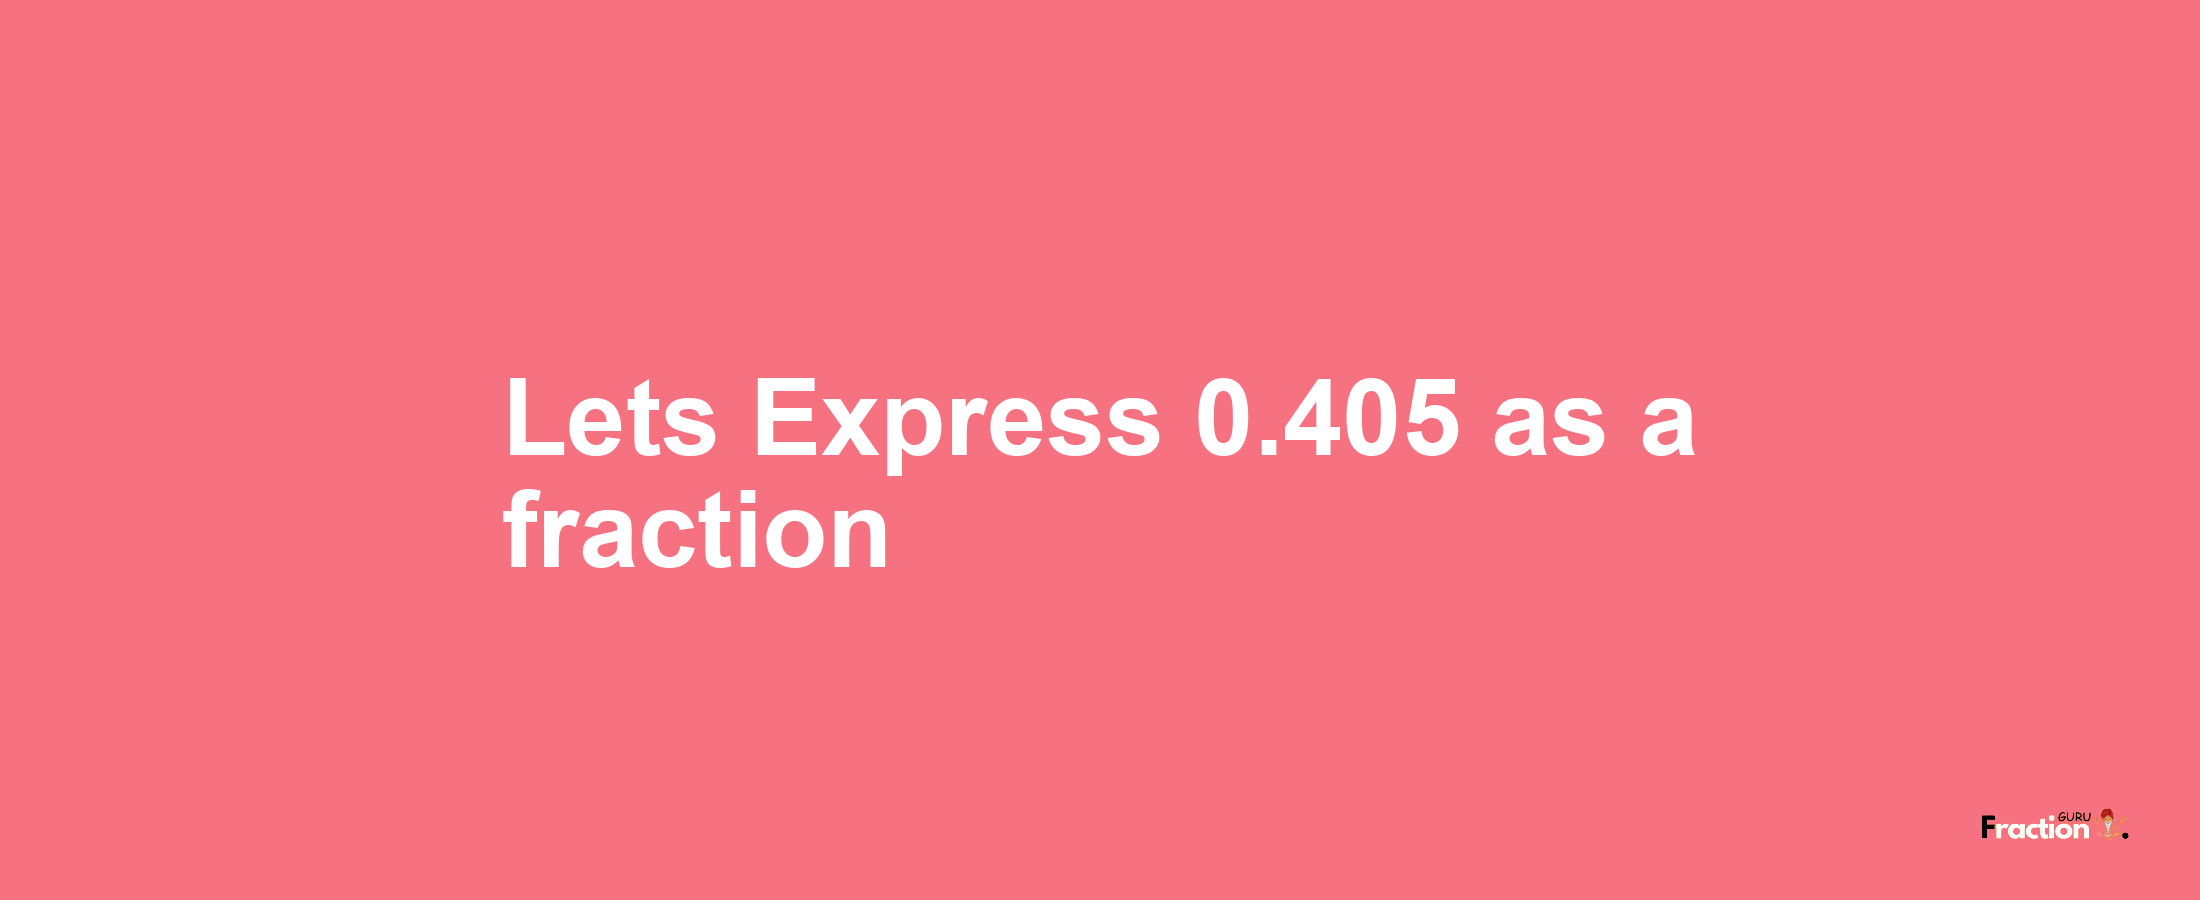 Lets Express 0.405 as afraction